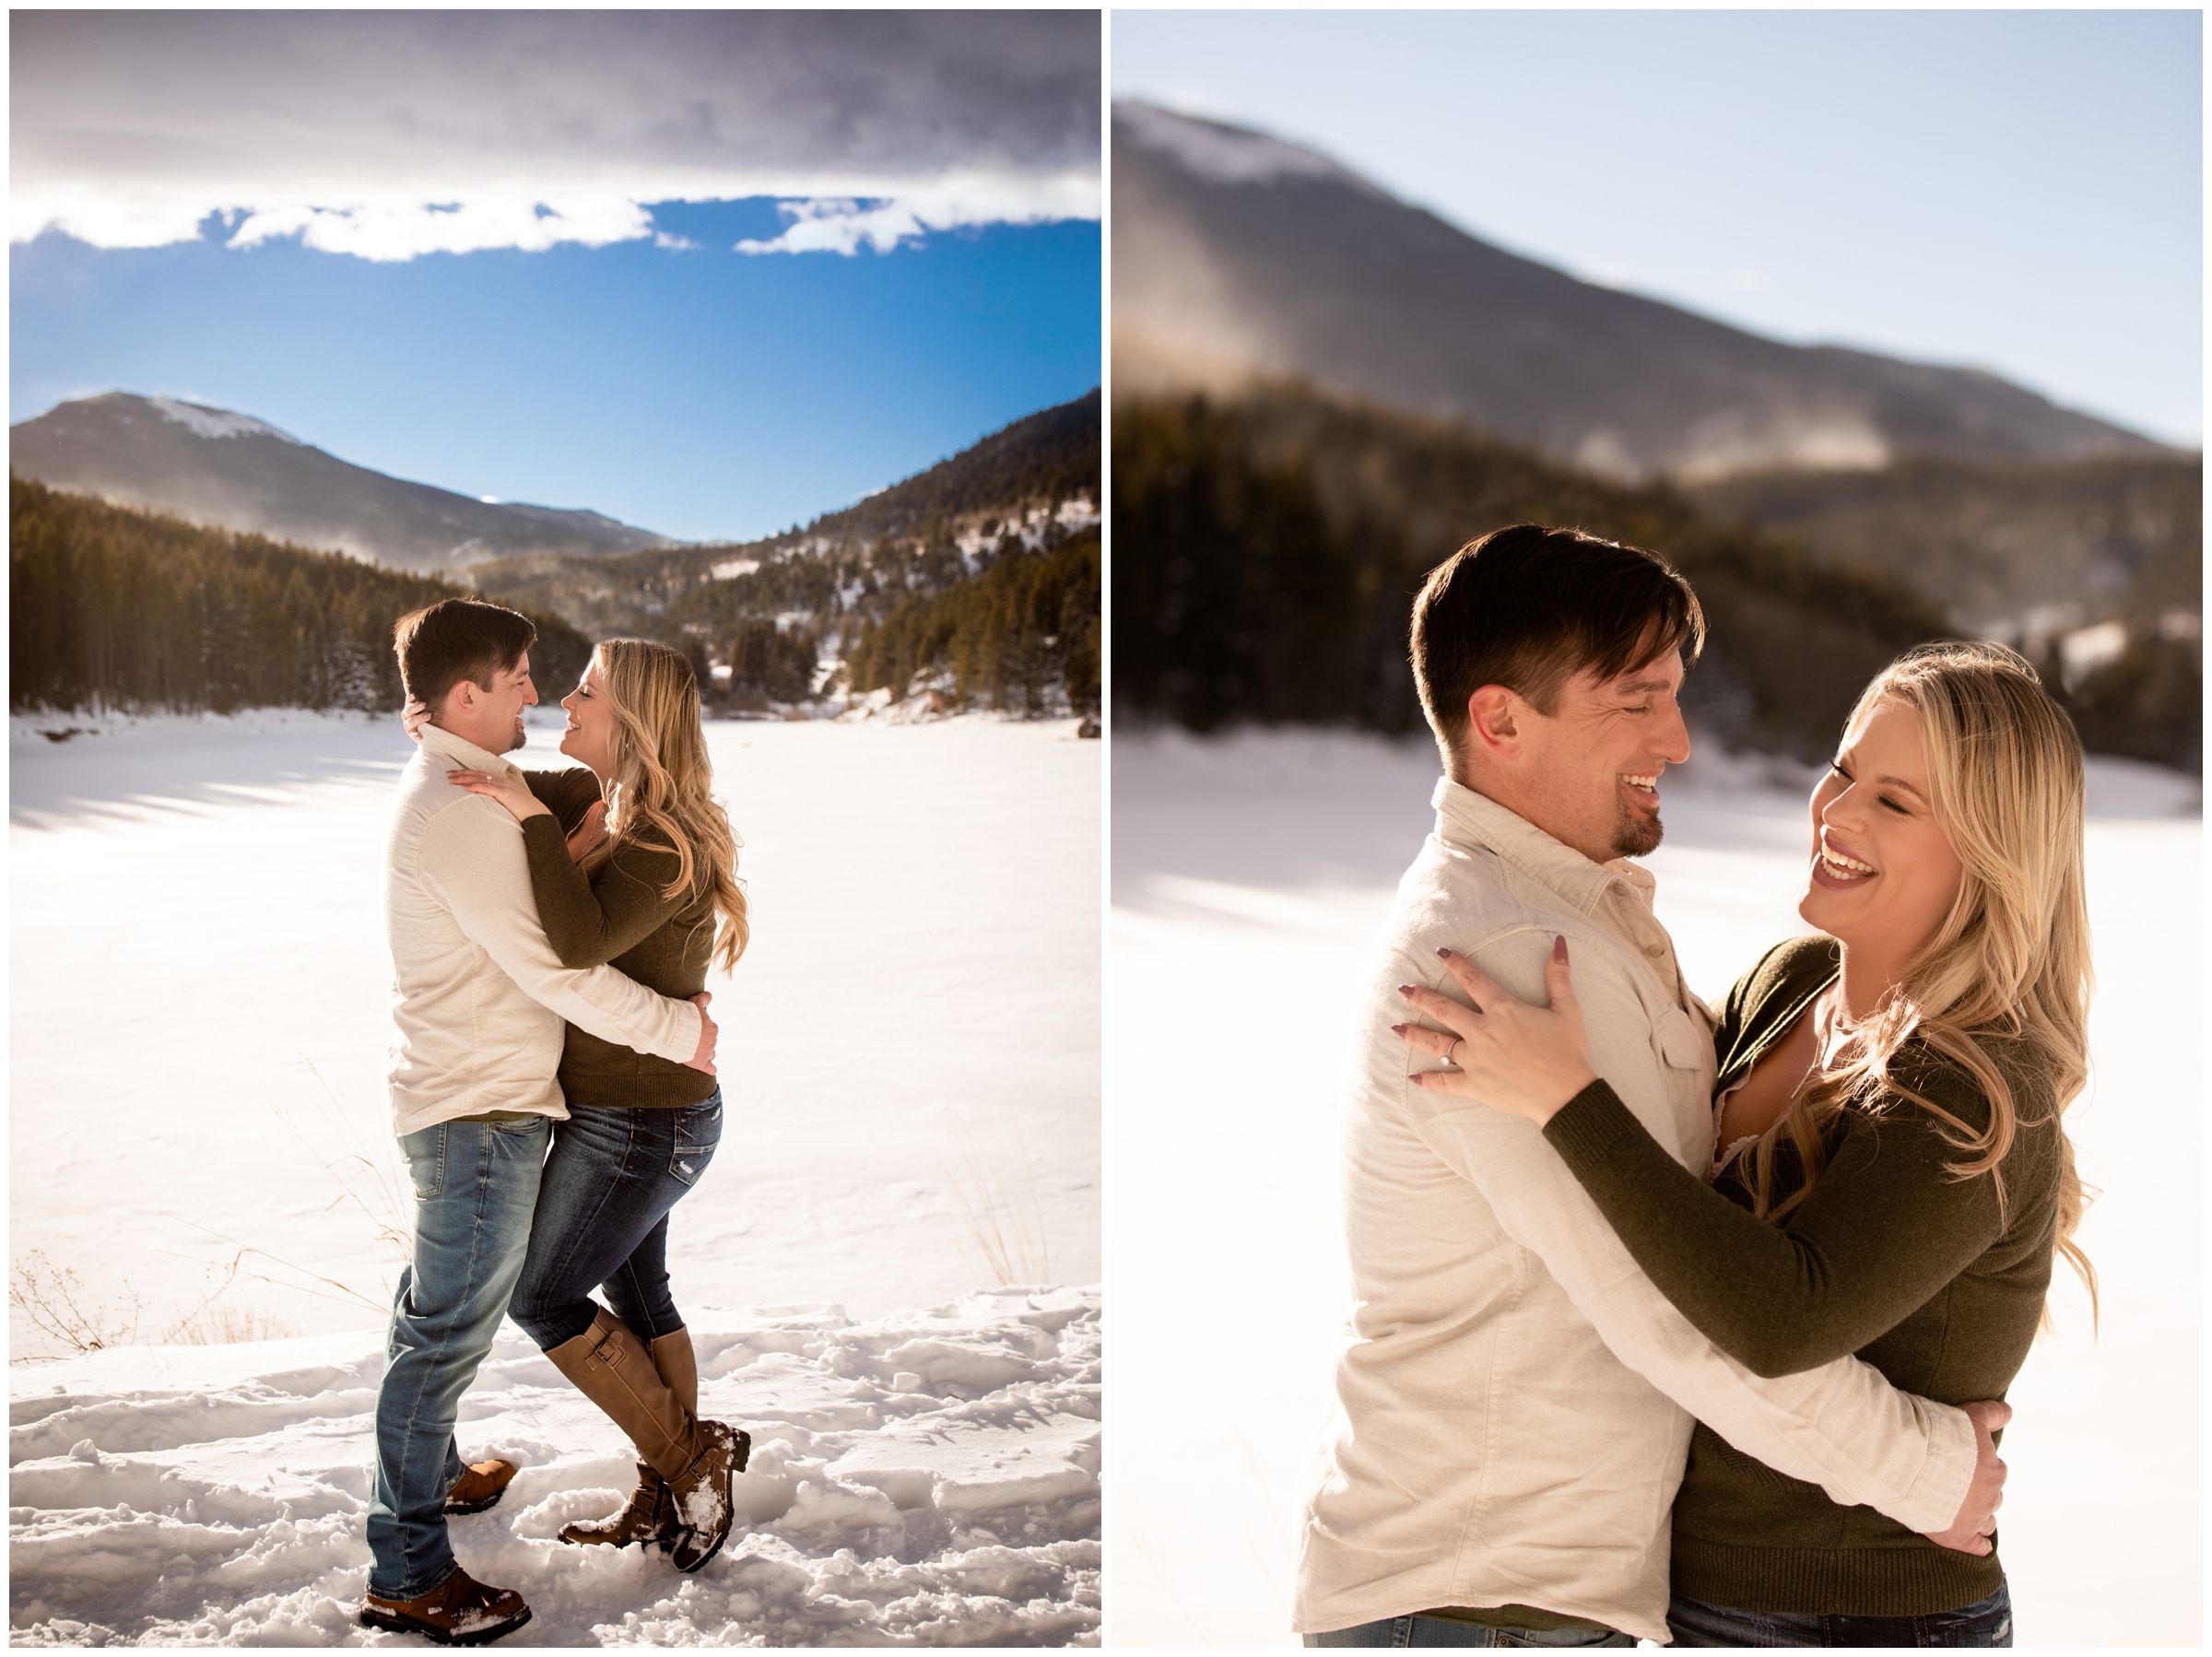 Colorado winter engagement pictures at Frosberg Park and Beaver Brook Watershed by Evergreen photographer Plum Pretty Photography